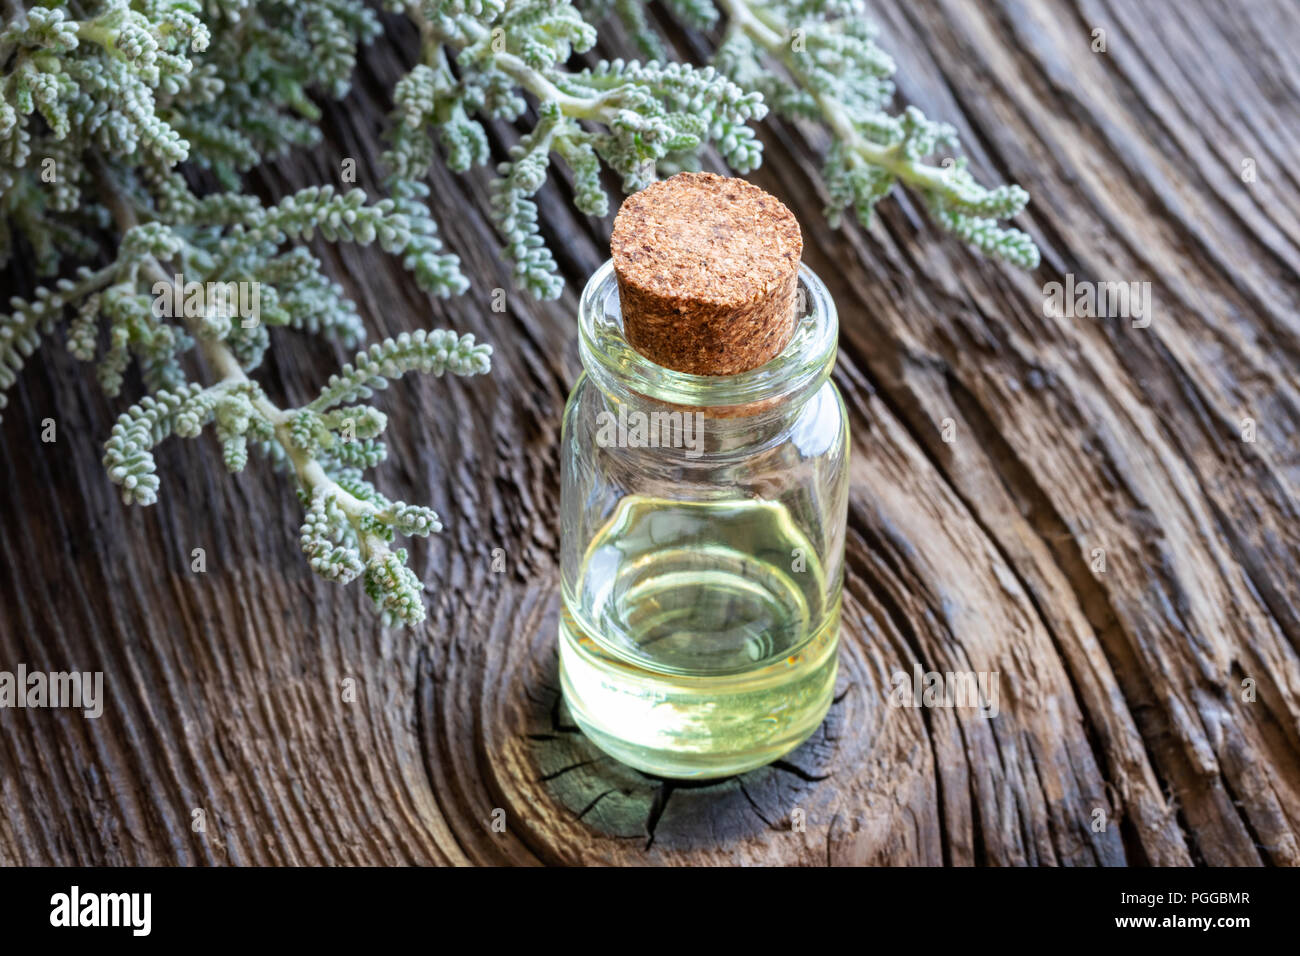 A bottle of essential oil with fresh Santolina chamaecyparissus Stock Photo